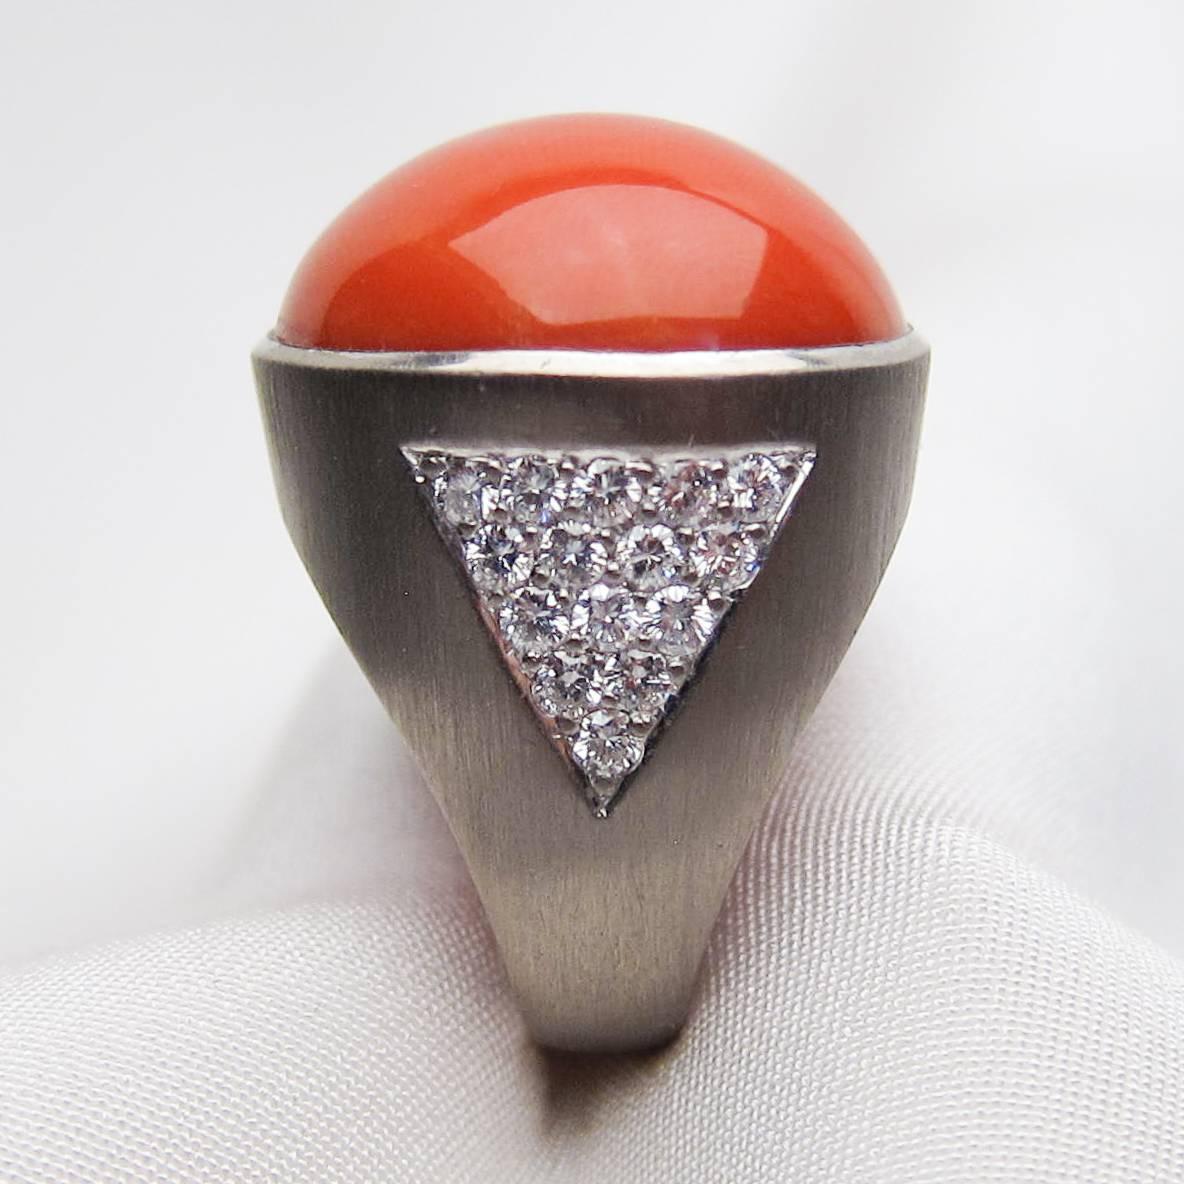 Circa 1970s. This cool cocktail ring exudes the individuality that characterized 1970s fashion. The star of the show is a 39.80 carat orange-red coral cabochon set in 18KT white gold. Accenting one shoulder of the ring are 15 brilliant-cut diamonds